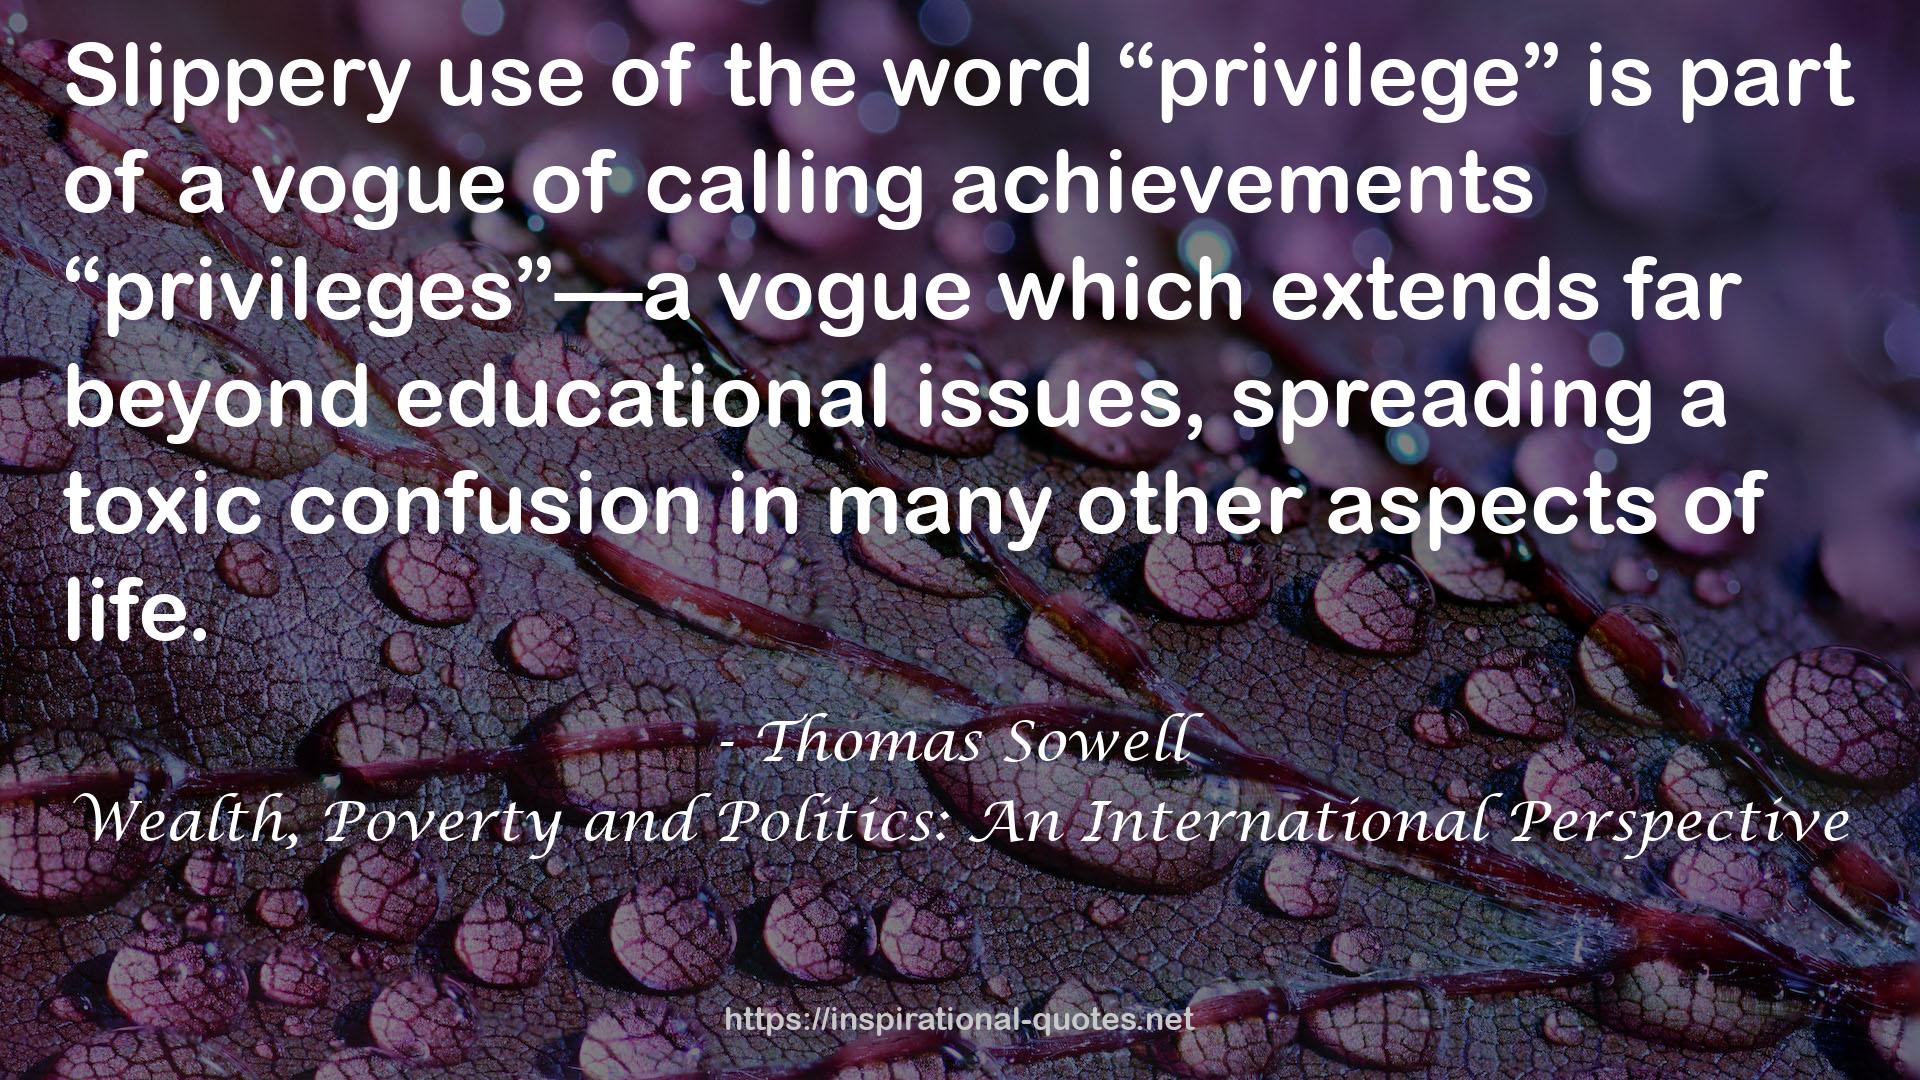 Wealth, Poverty and Politics: An International Perspective QUOTES